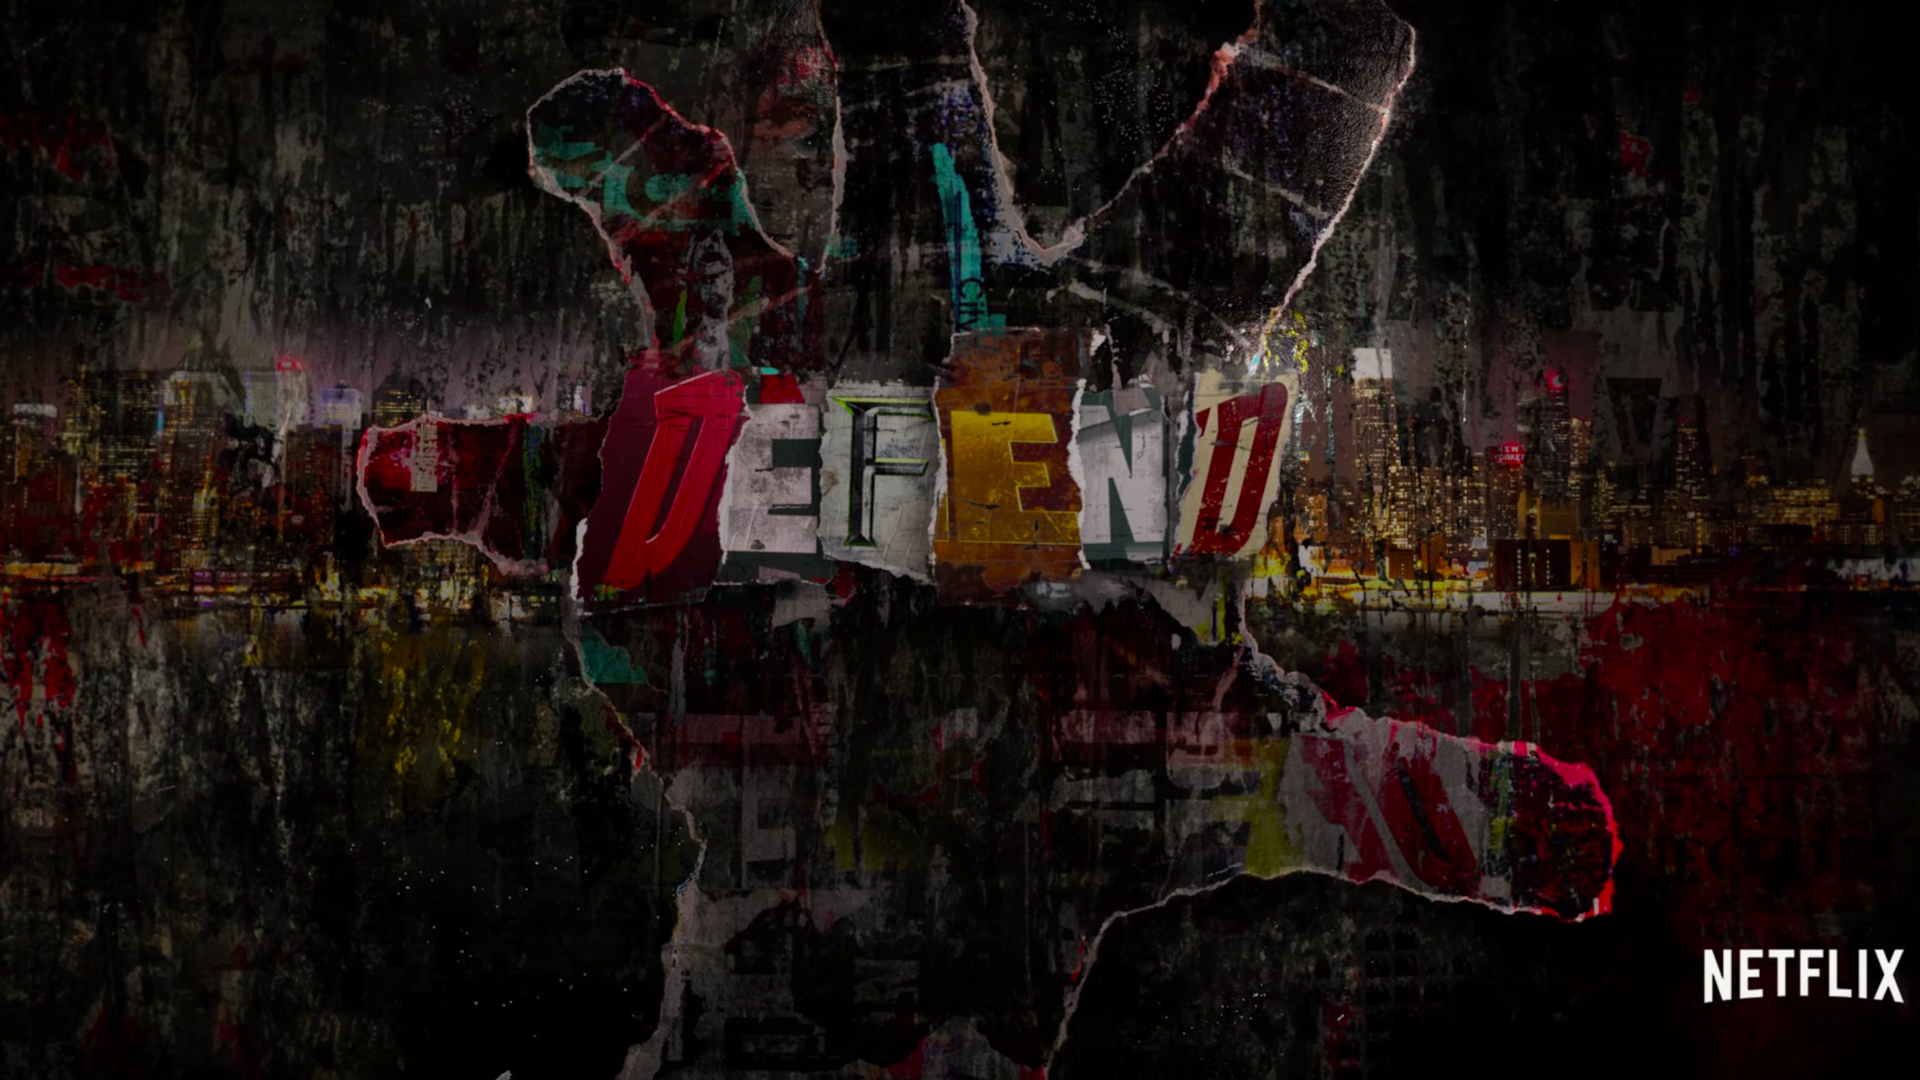 The Defenders Tv Show Wallpapers